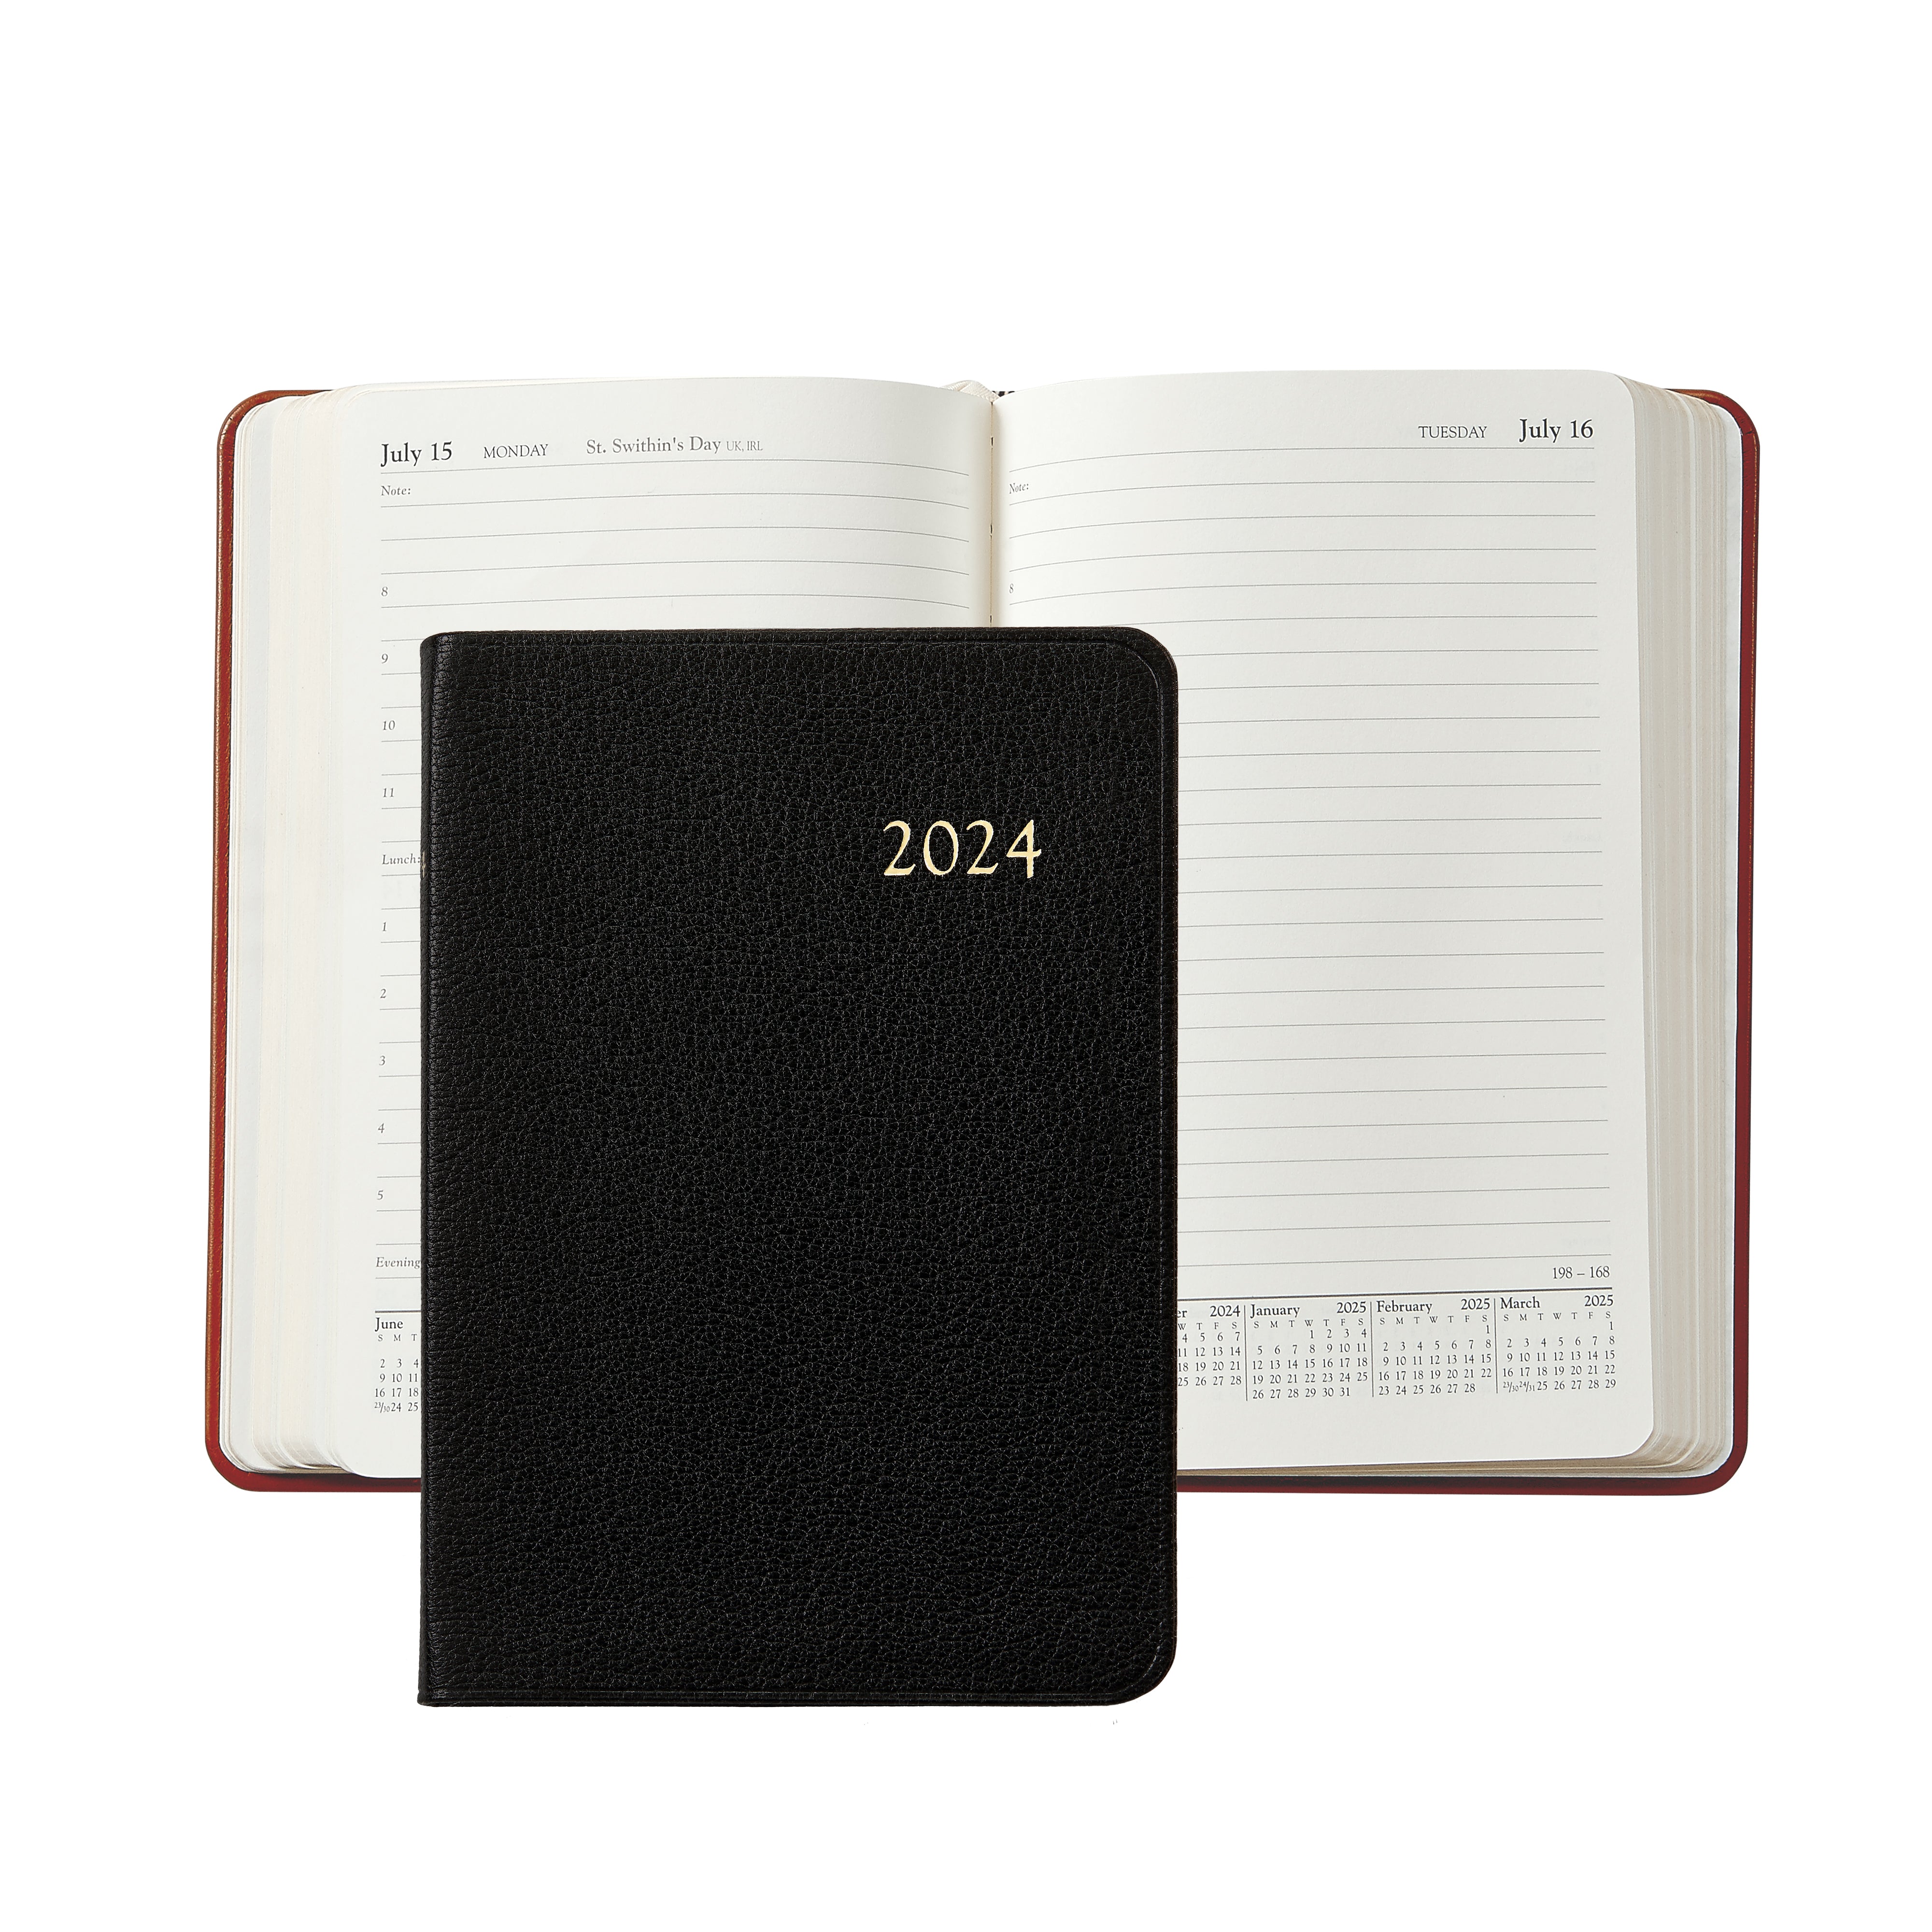 Graphic Image 2024 Daily Journal Planner Black Goatskin Leather